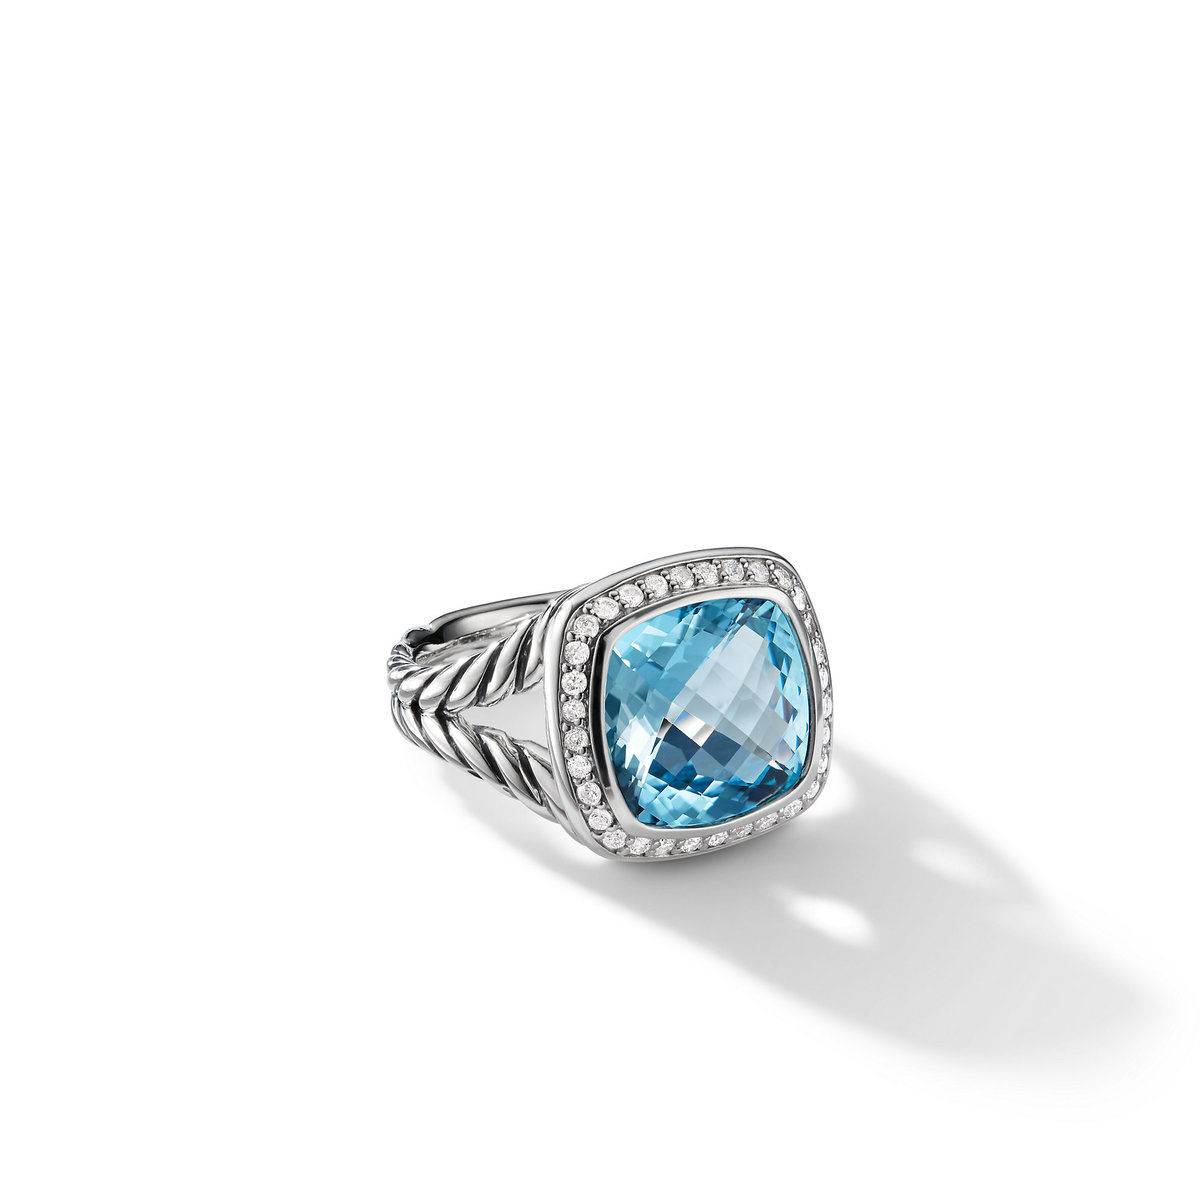 David Yurman Albion Ring with Blue Topaz and Pave Diamonds | Size 7